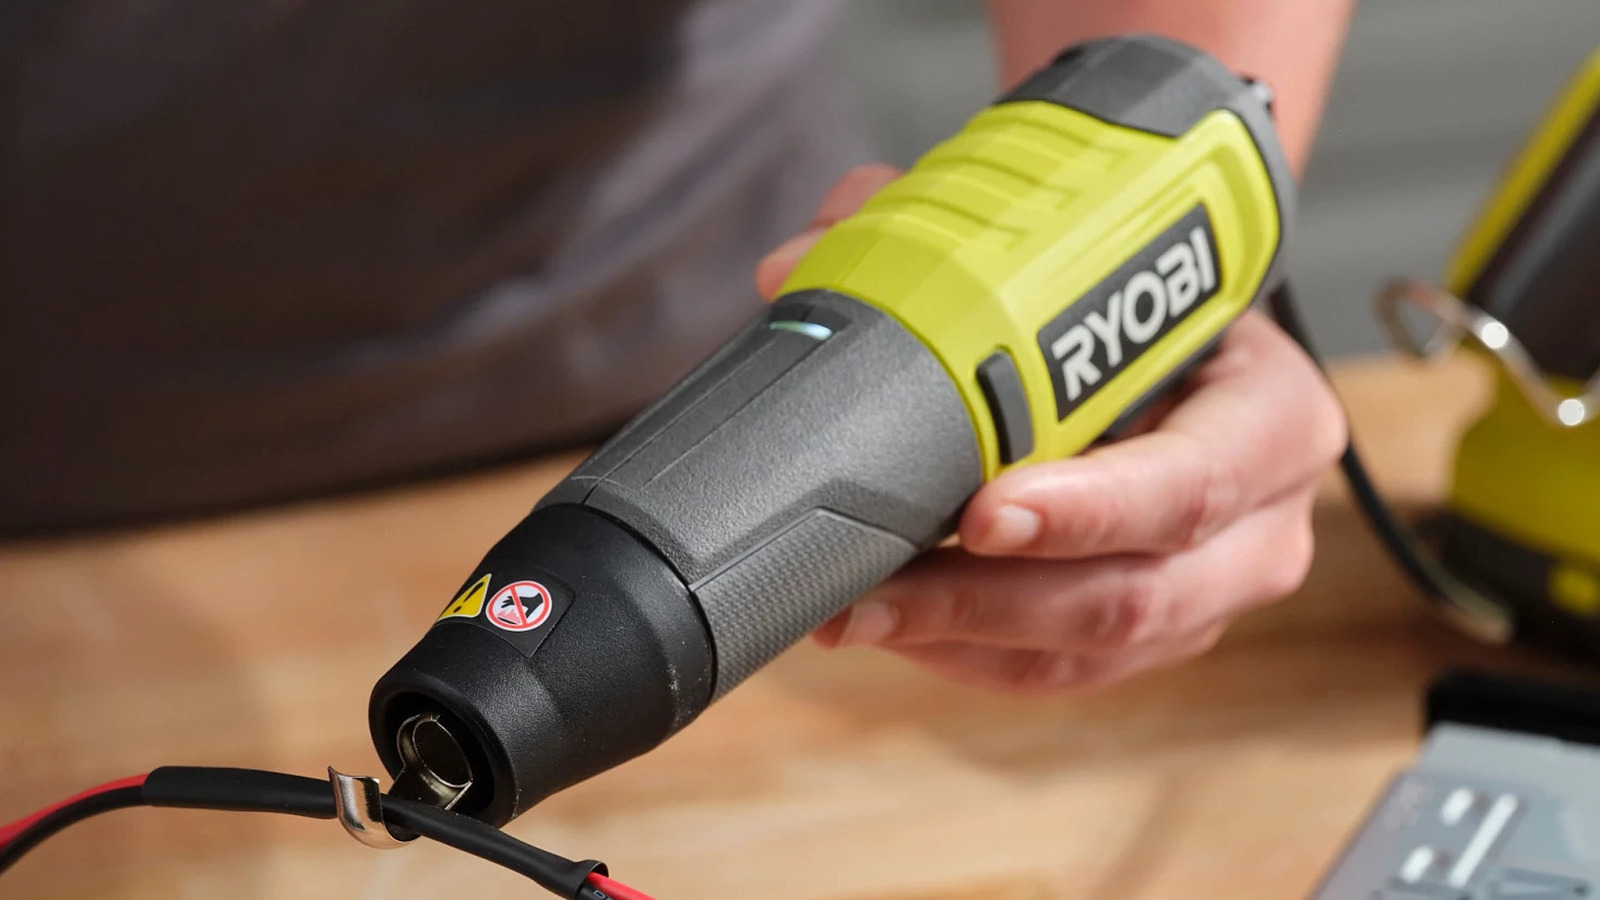 This Ryobi 18V ONE+ Heat Pen Is Just The Tool For Tough-To-Reach Jobs